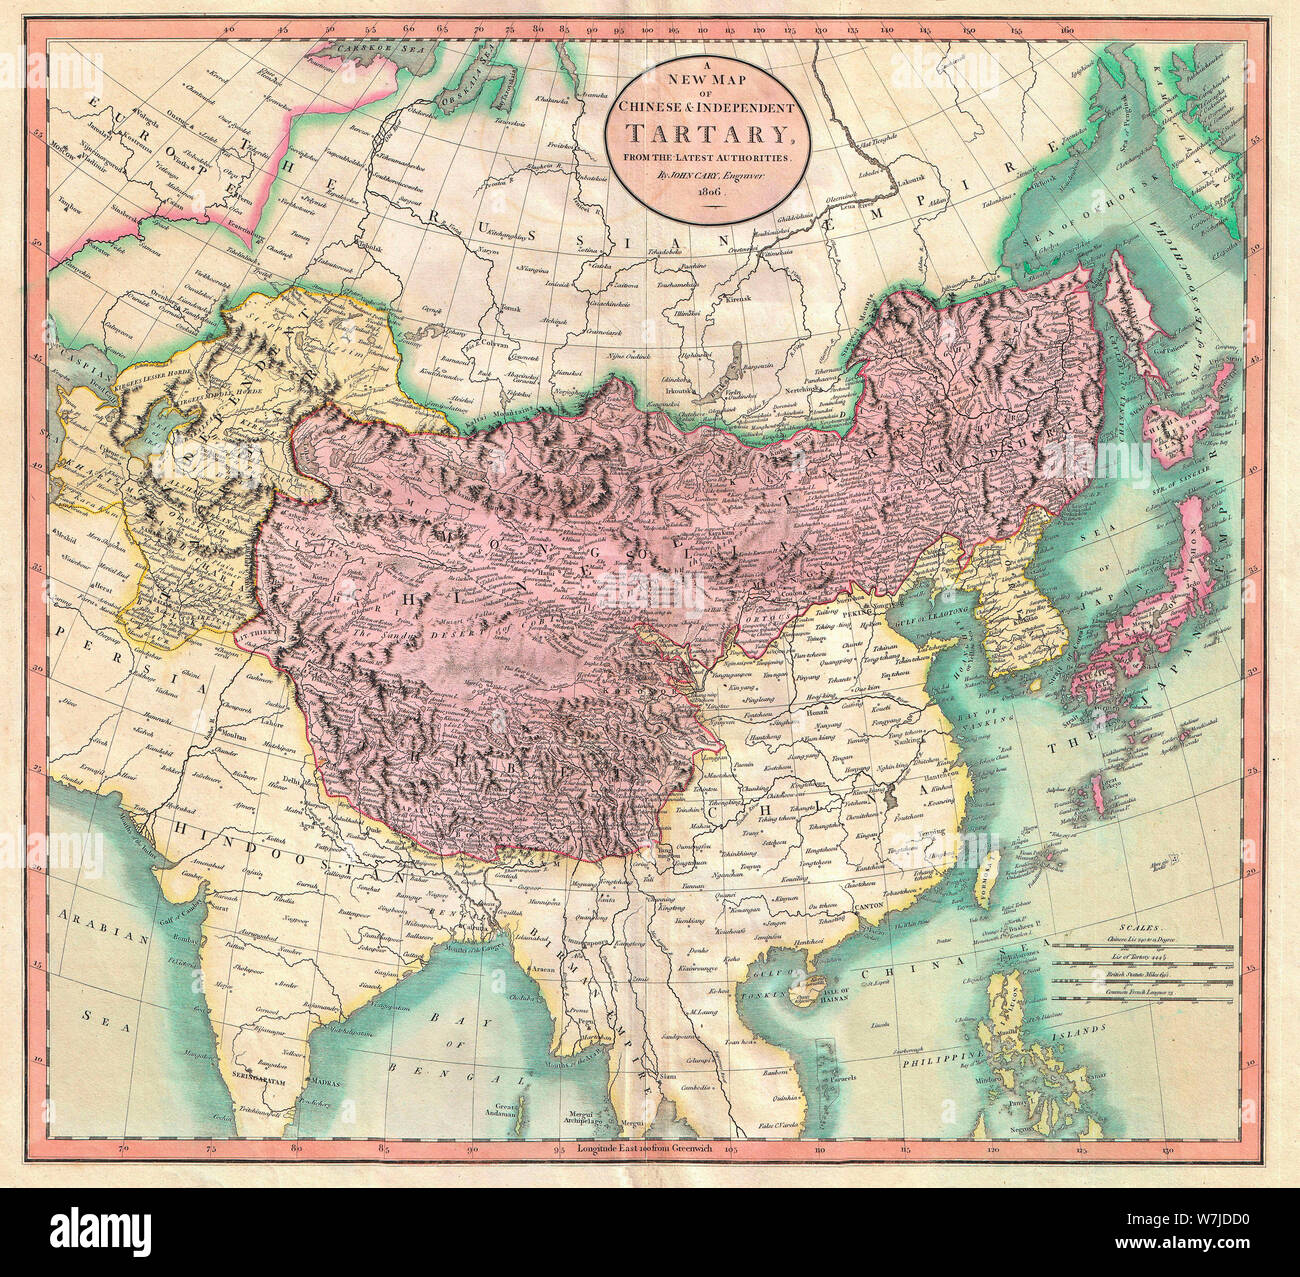 A New Map of Chinese & Independent Tartary - An exceptionally beautiful example of John Cary’s important 1806 map of Chinese and Independent Tartary. Covers Central Asia from the Caspian Sea to Japan, extends as far north as the Obskaia Sea and as far south as India, Burma and the Philippines. Includes the modern day nations of Uzbekistan, Kazakhstan, Turkmenistan, Kirgizstan, Tajikistan and Mongolia. One of Cary’s most interesting maps. Central Asia, despite hundreds of years of passing trade on the Silk Routes, was still, at the turn of the century a largely unknown land. 1806 Stock Photo